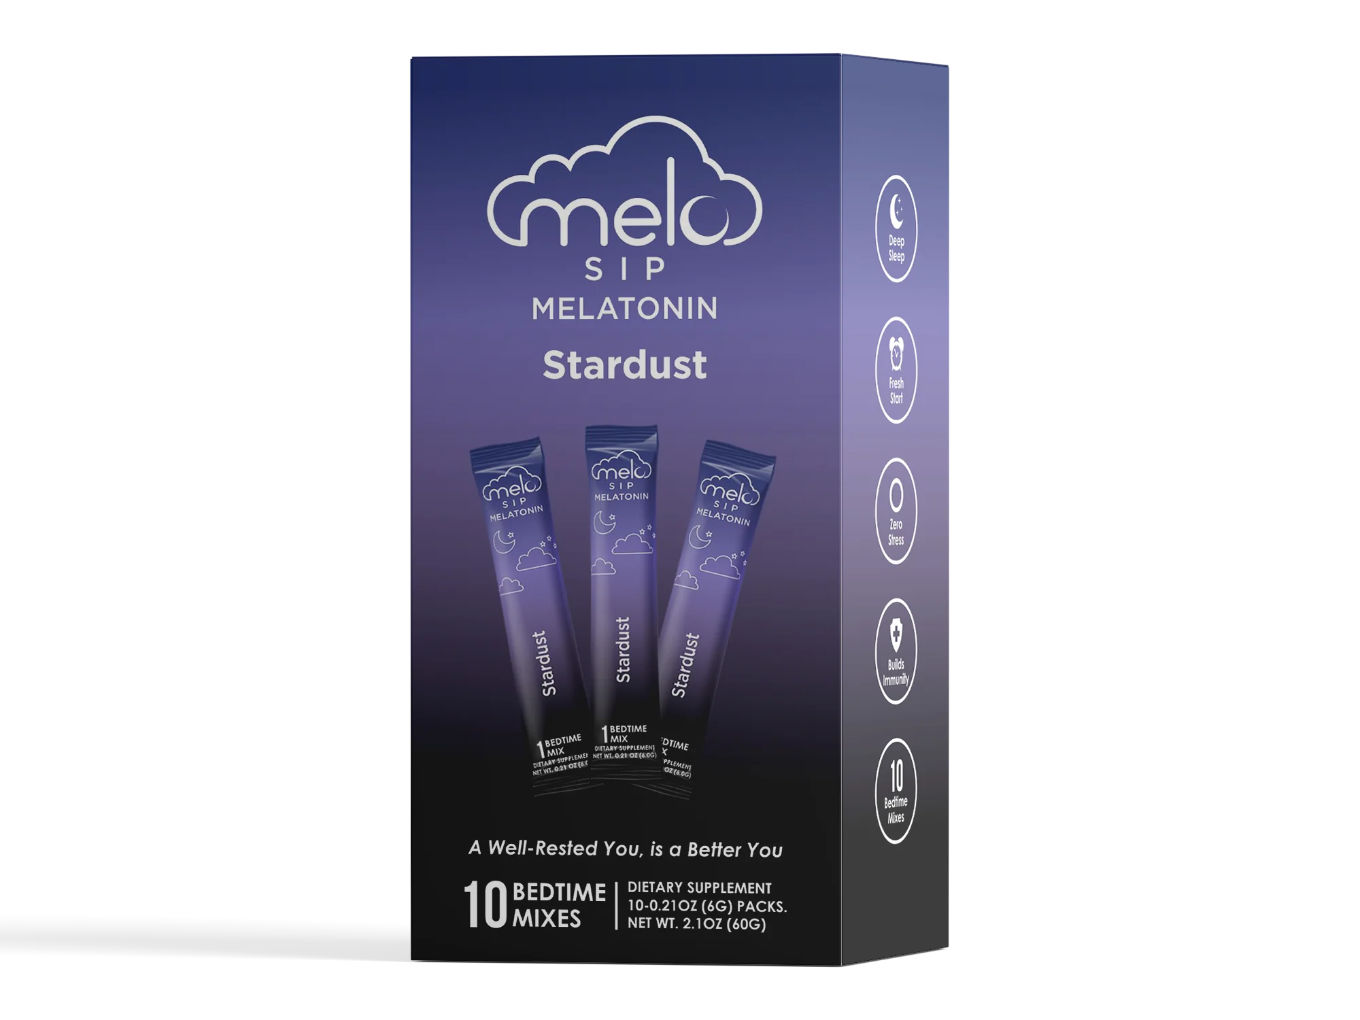 A package of MELO Sip in Stardust flavor